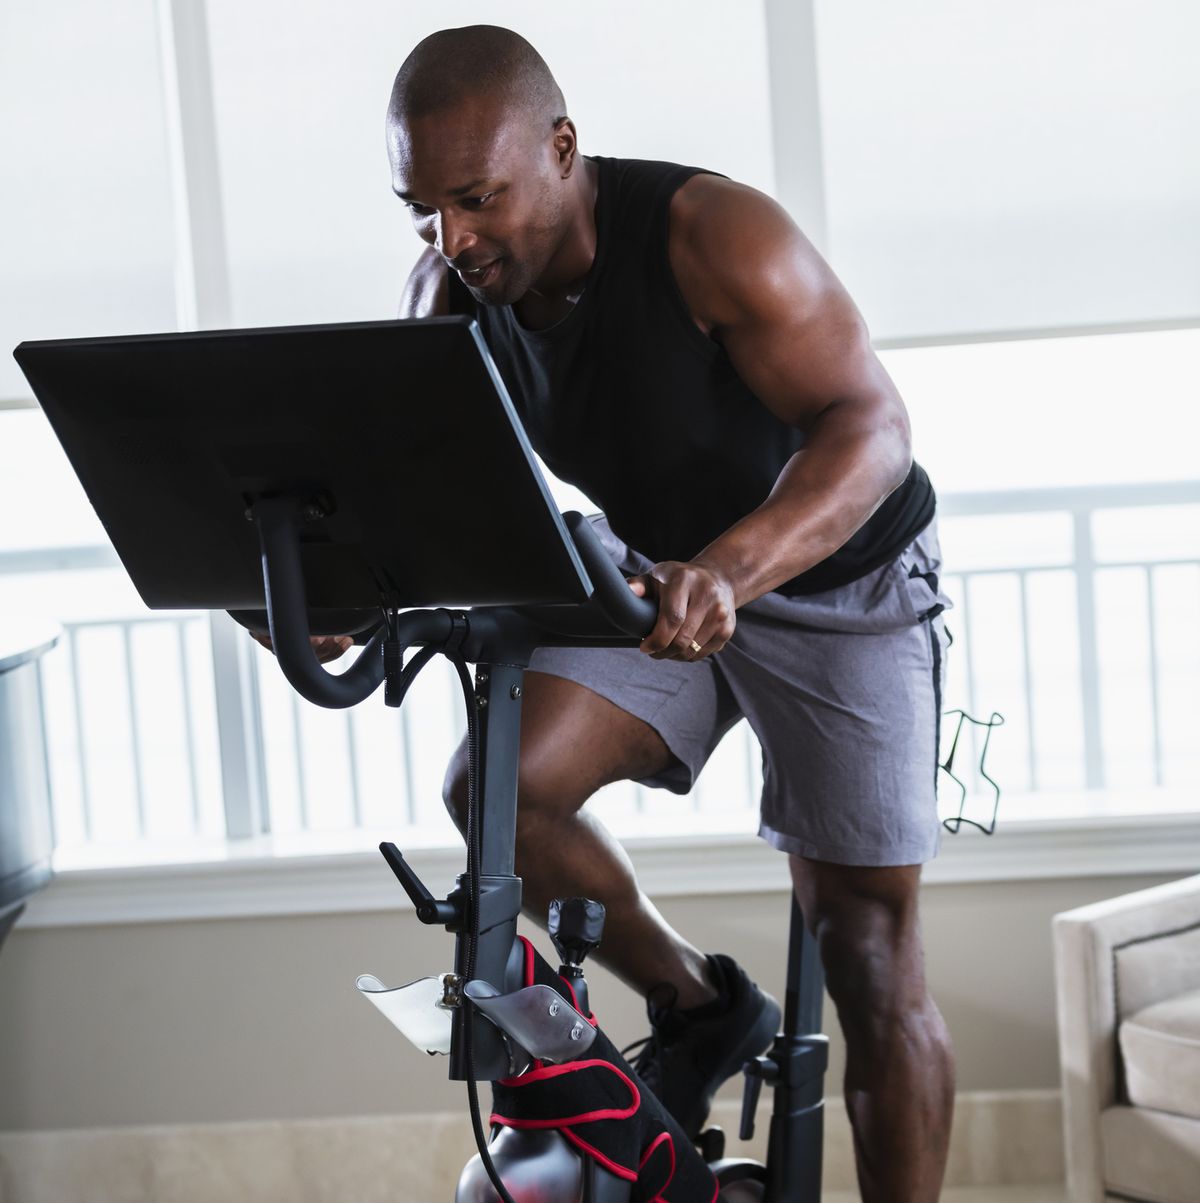 What is the spin bike good for?